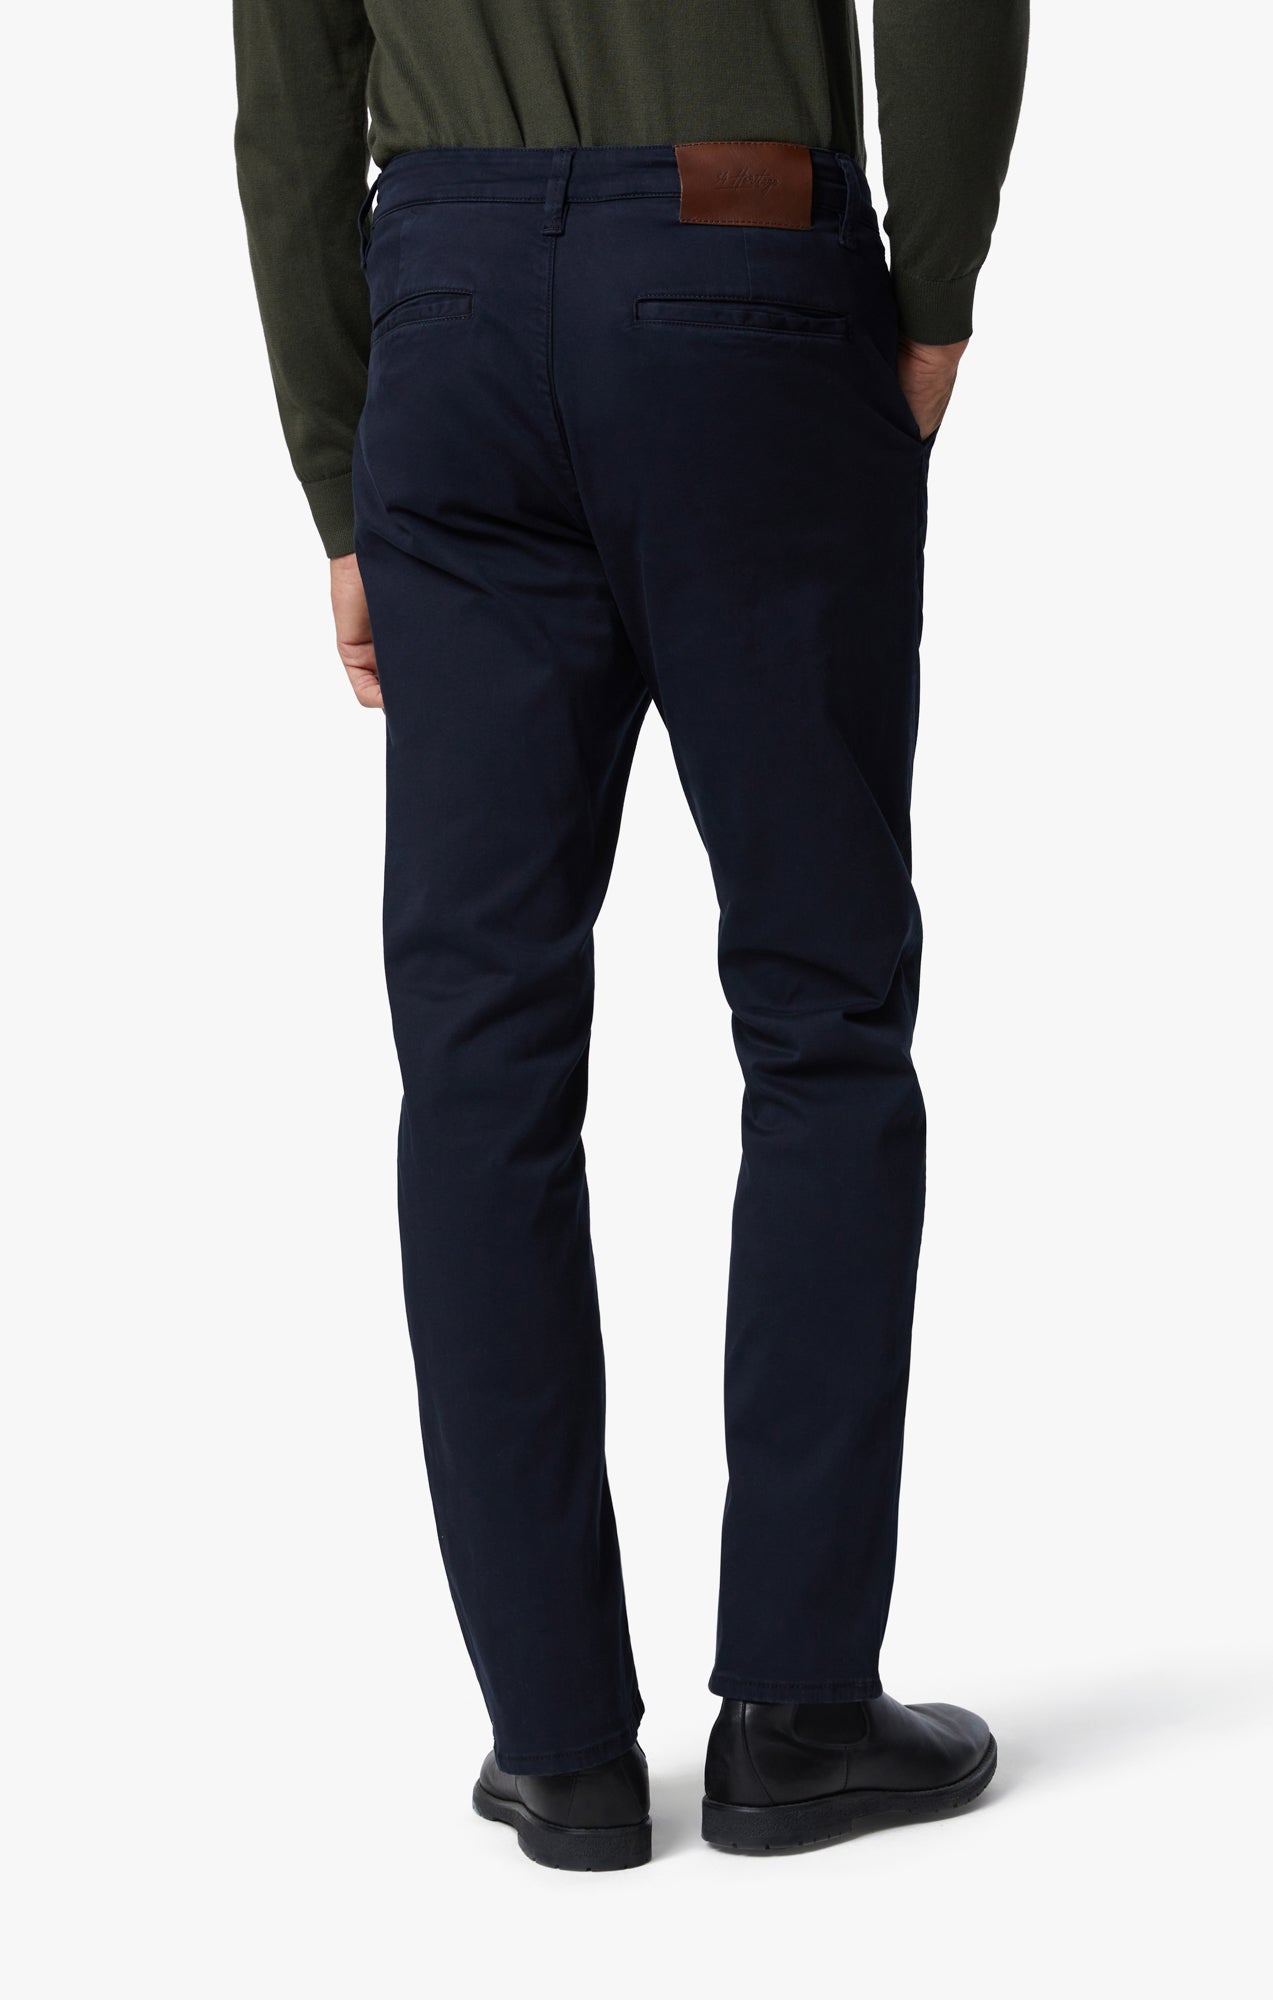 Charisma Relaxed Straight Chino In Navy Twill Image 5